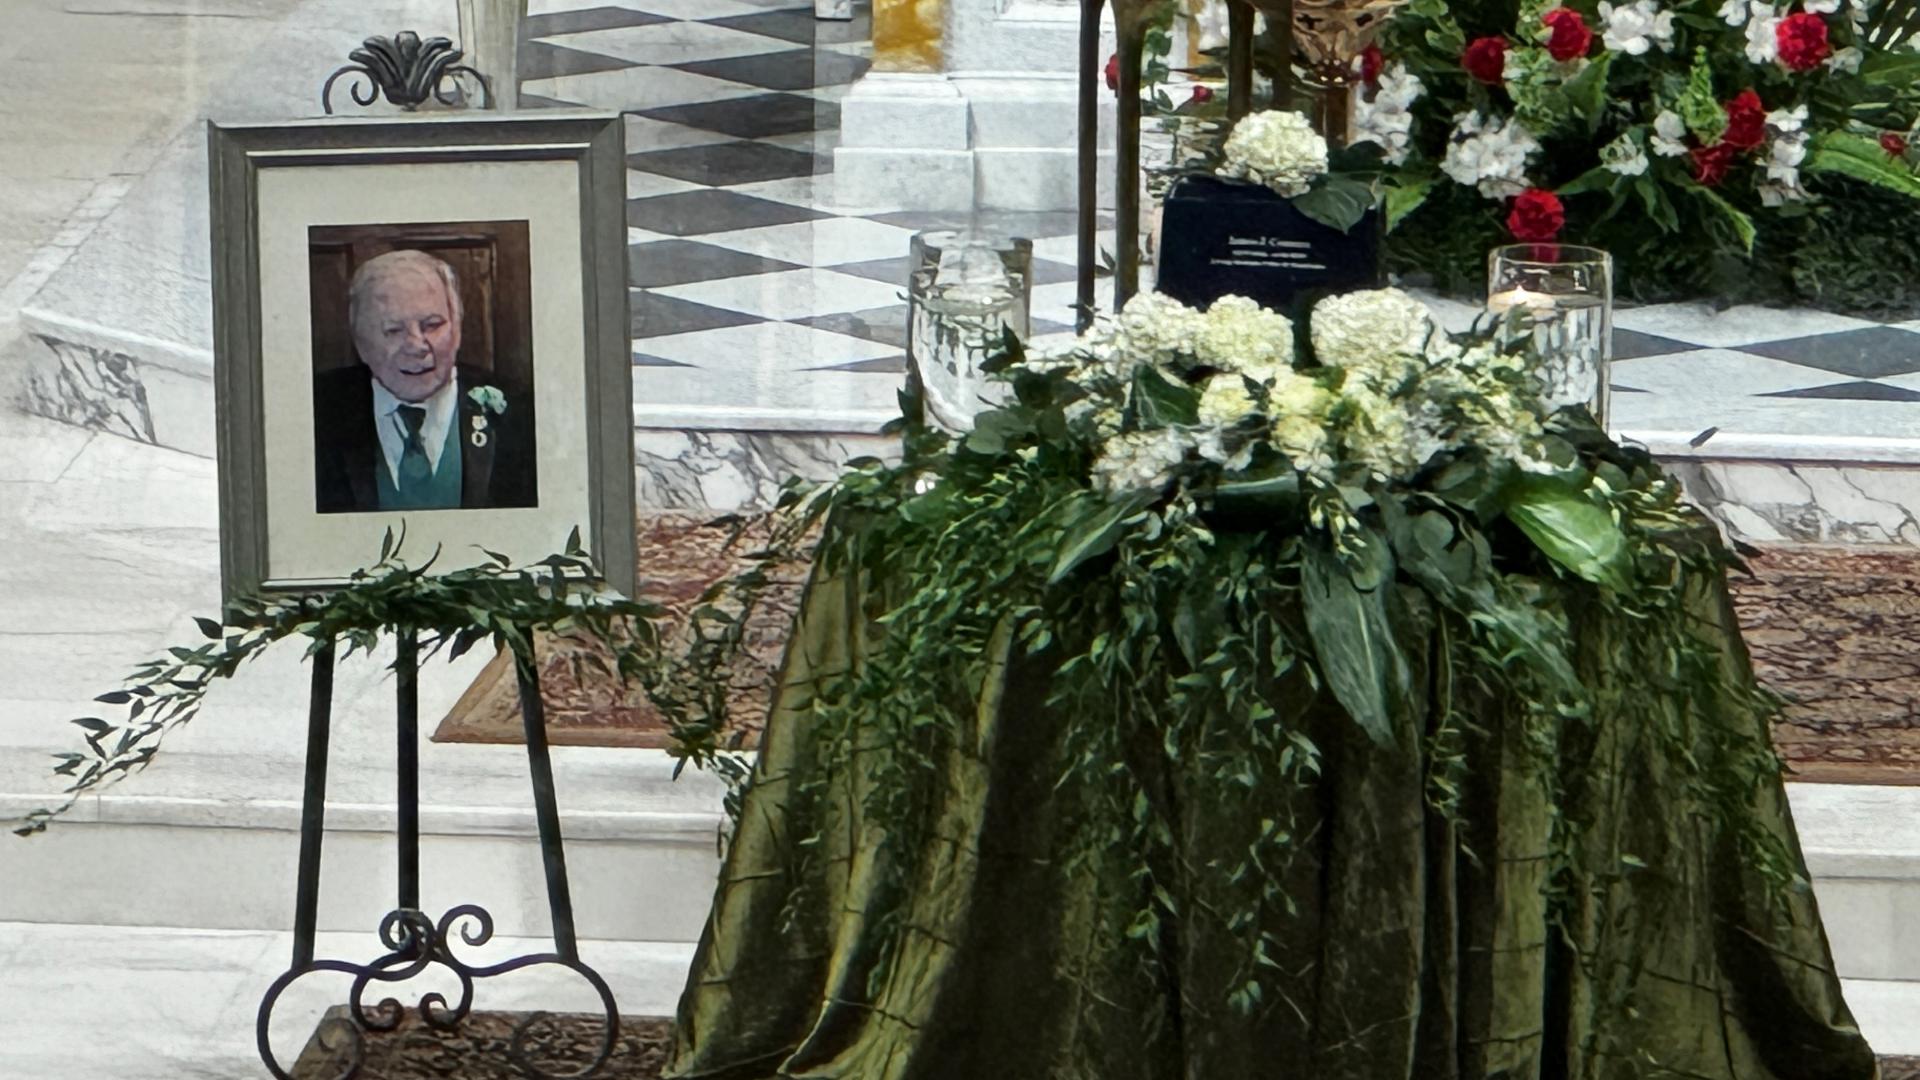 A live stream of the funeral service at St. Peter's Cathedral was provided by the Diocese of Scranton.